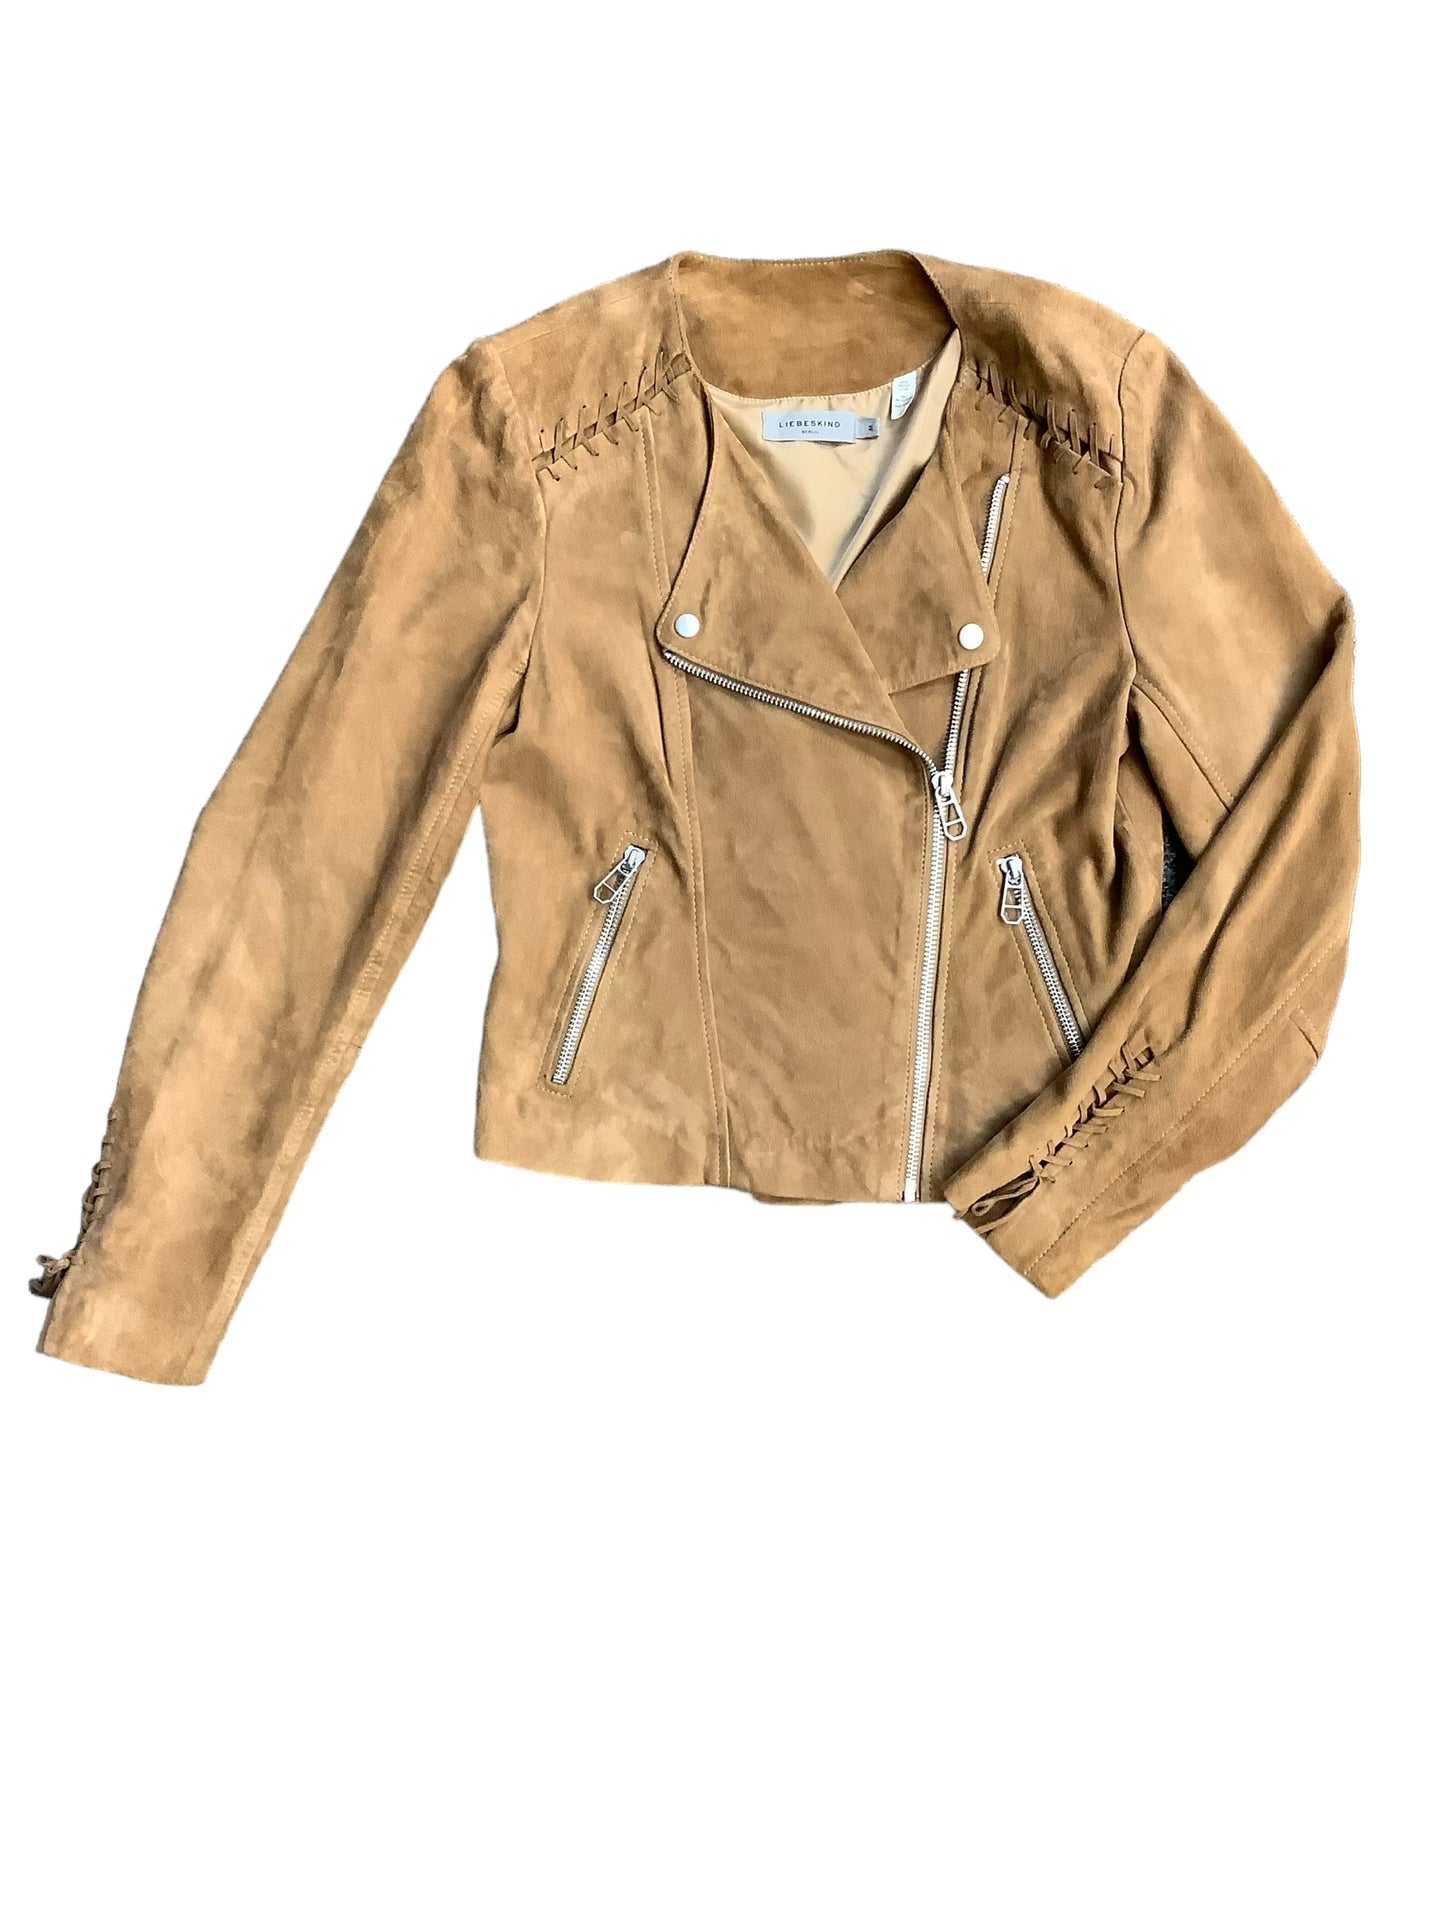 Jacket Leather By Liebeskind  Size: M-fits like xs/s